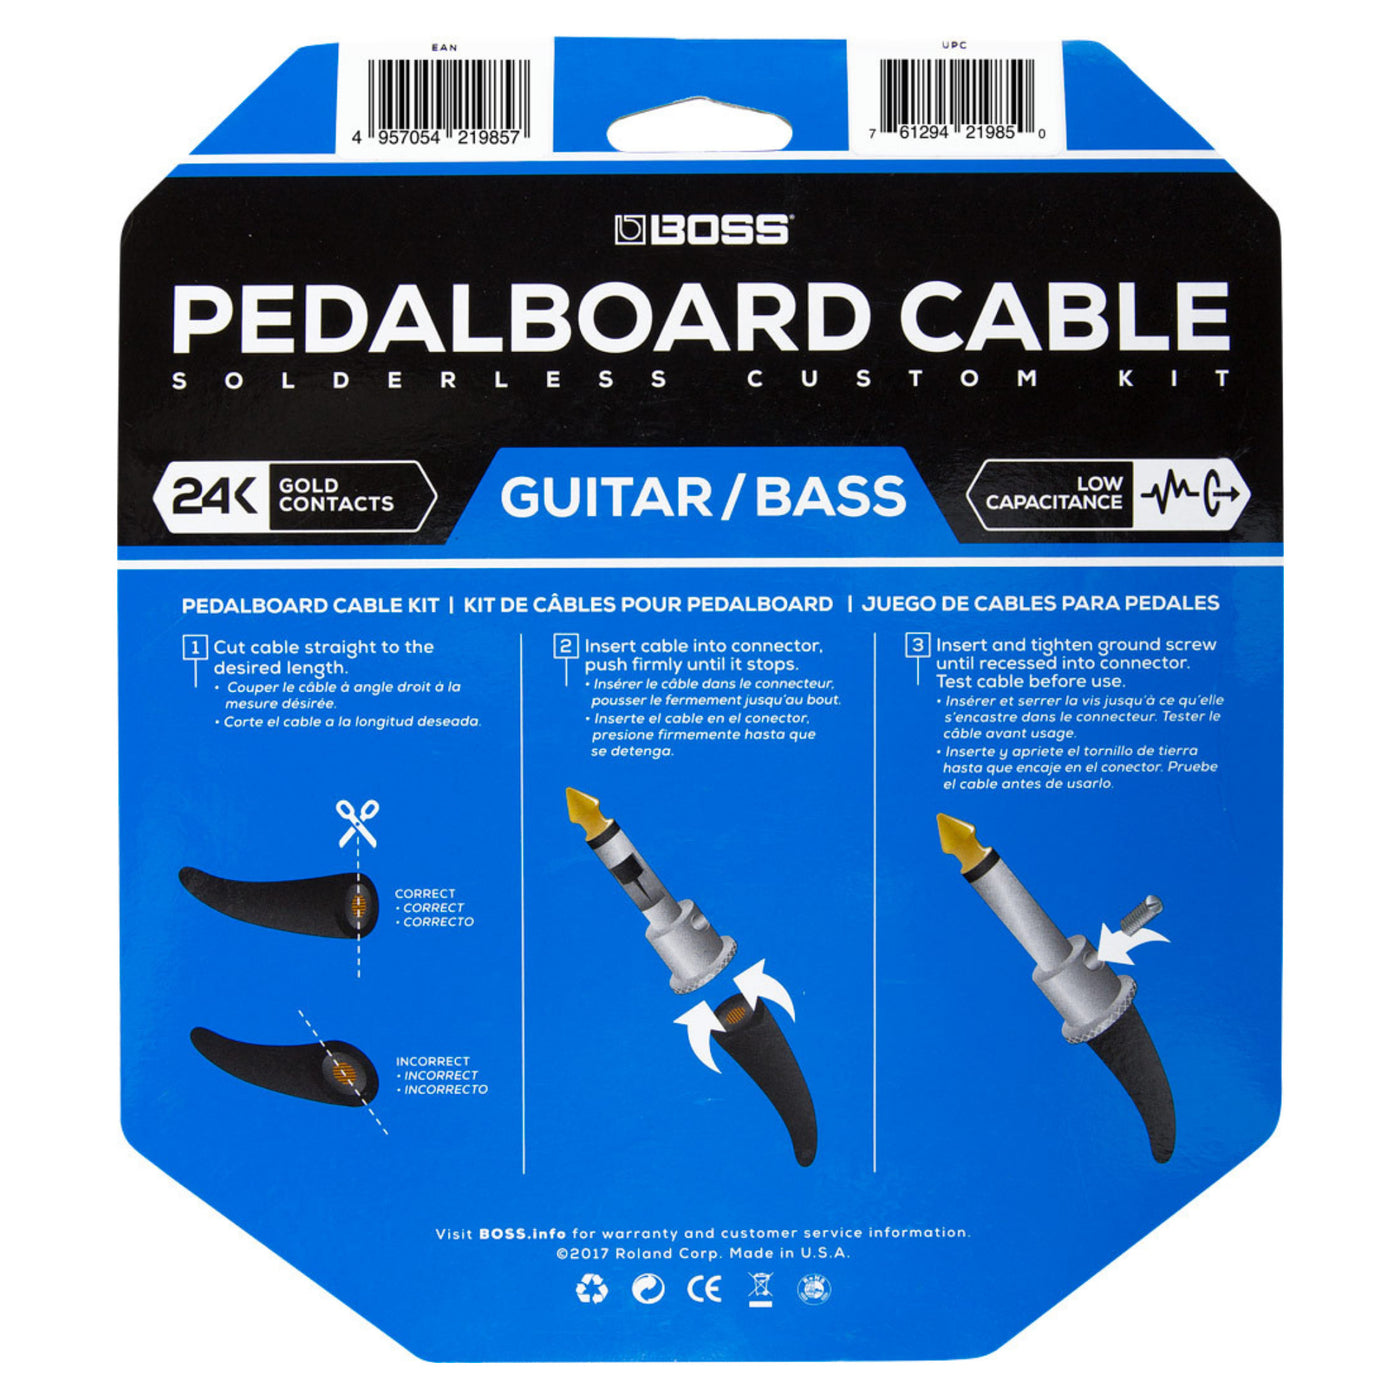 Boss BCK-24 Pedal Board Cable Kit - 24', 24 Connectors